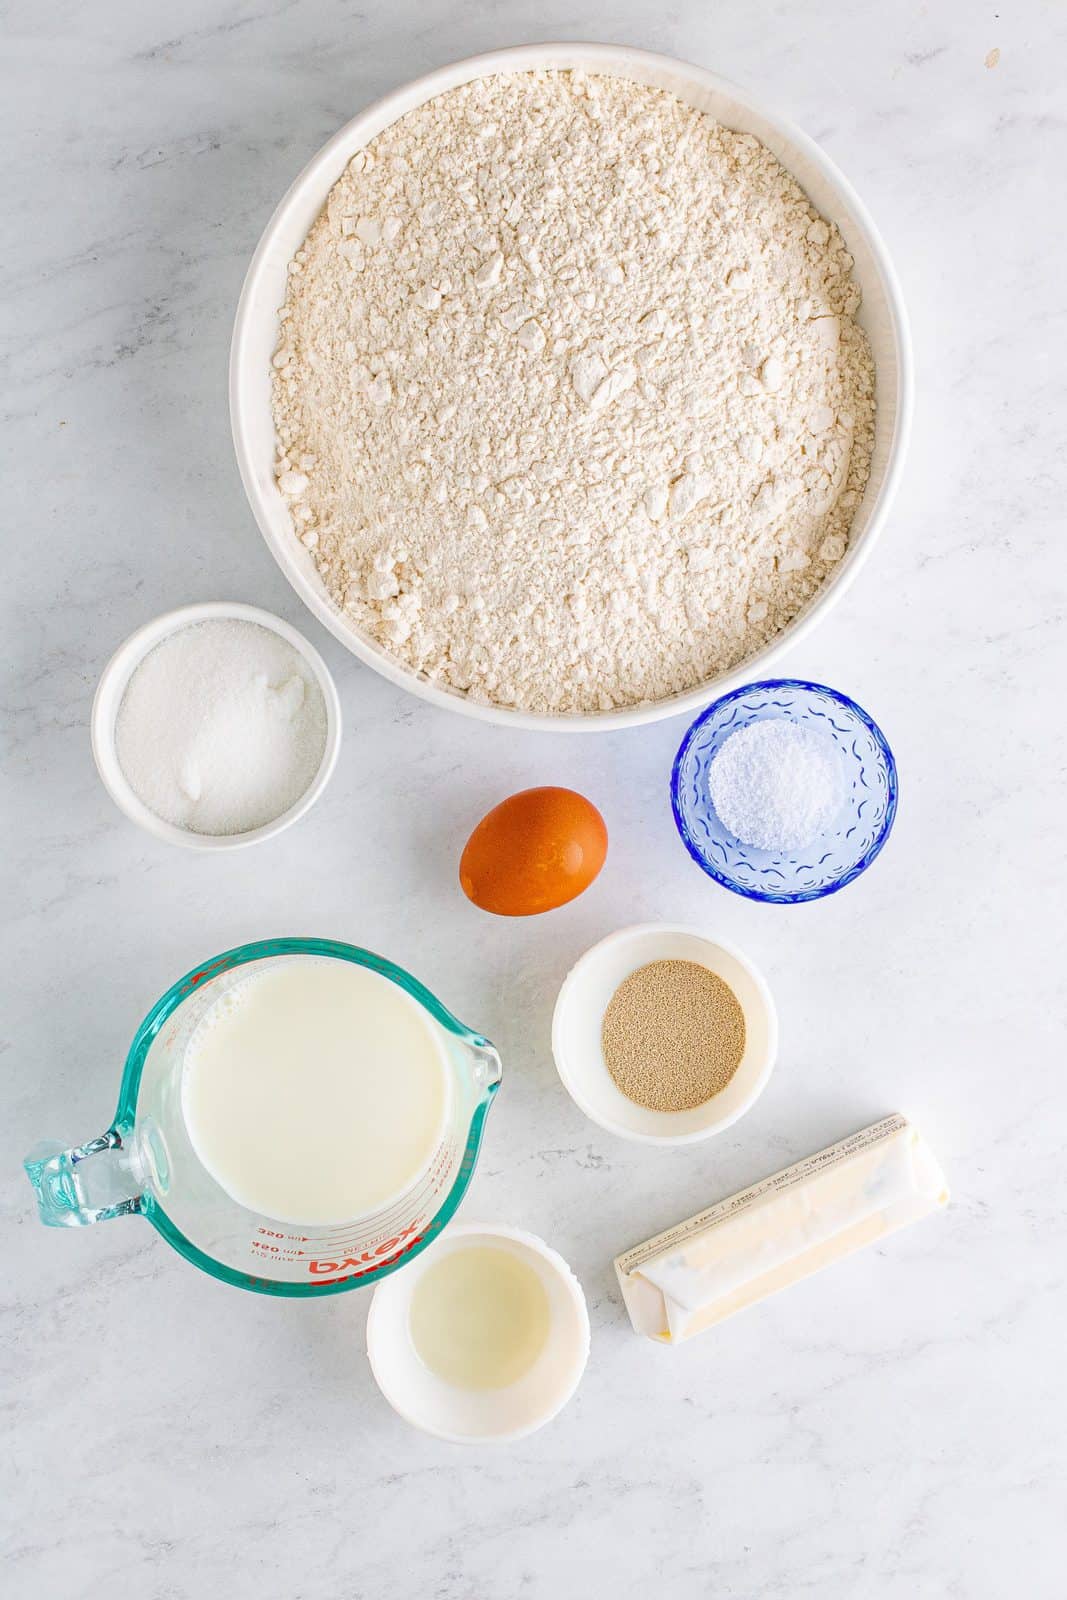 Ingredients needed: unsalted butter, granulated sugar, kosher salt, whole milk, active dry yeast, egg, 3 ½ to 4 cups all-purpose flour and vegetable oil.